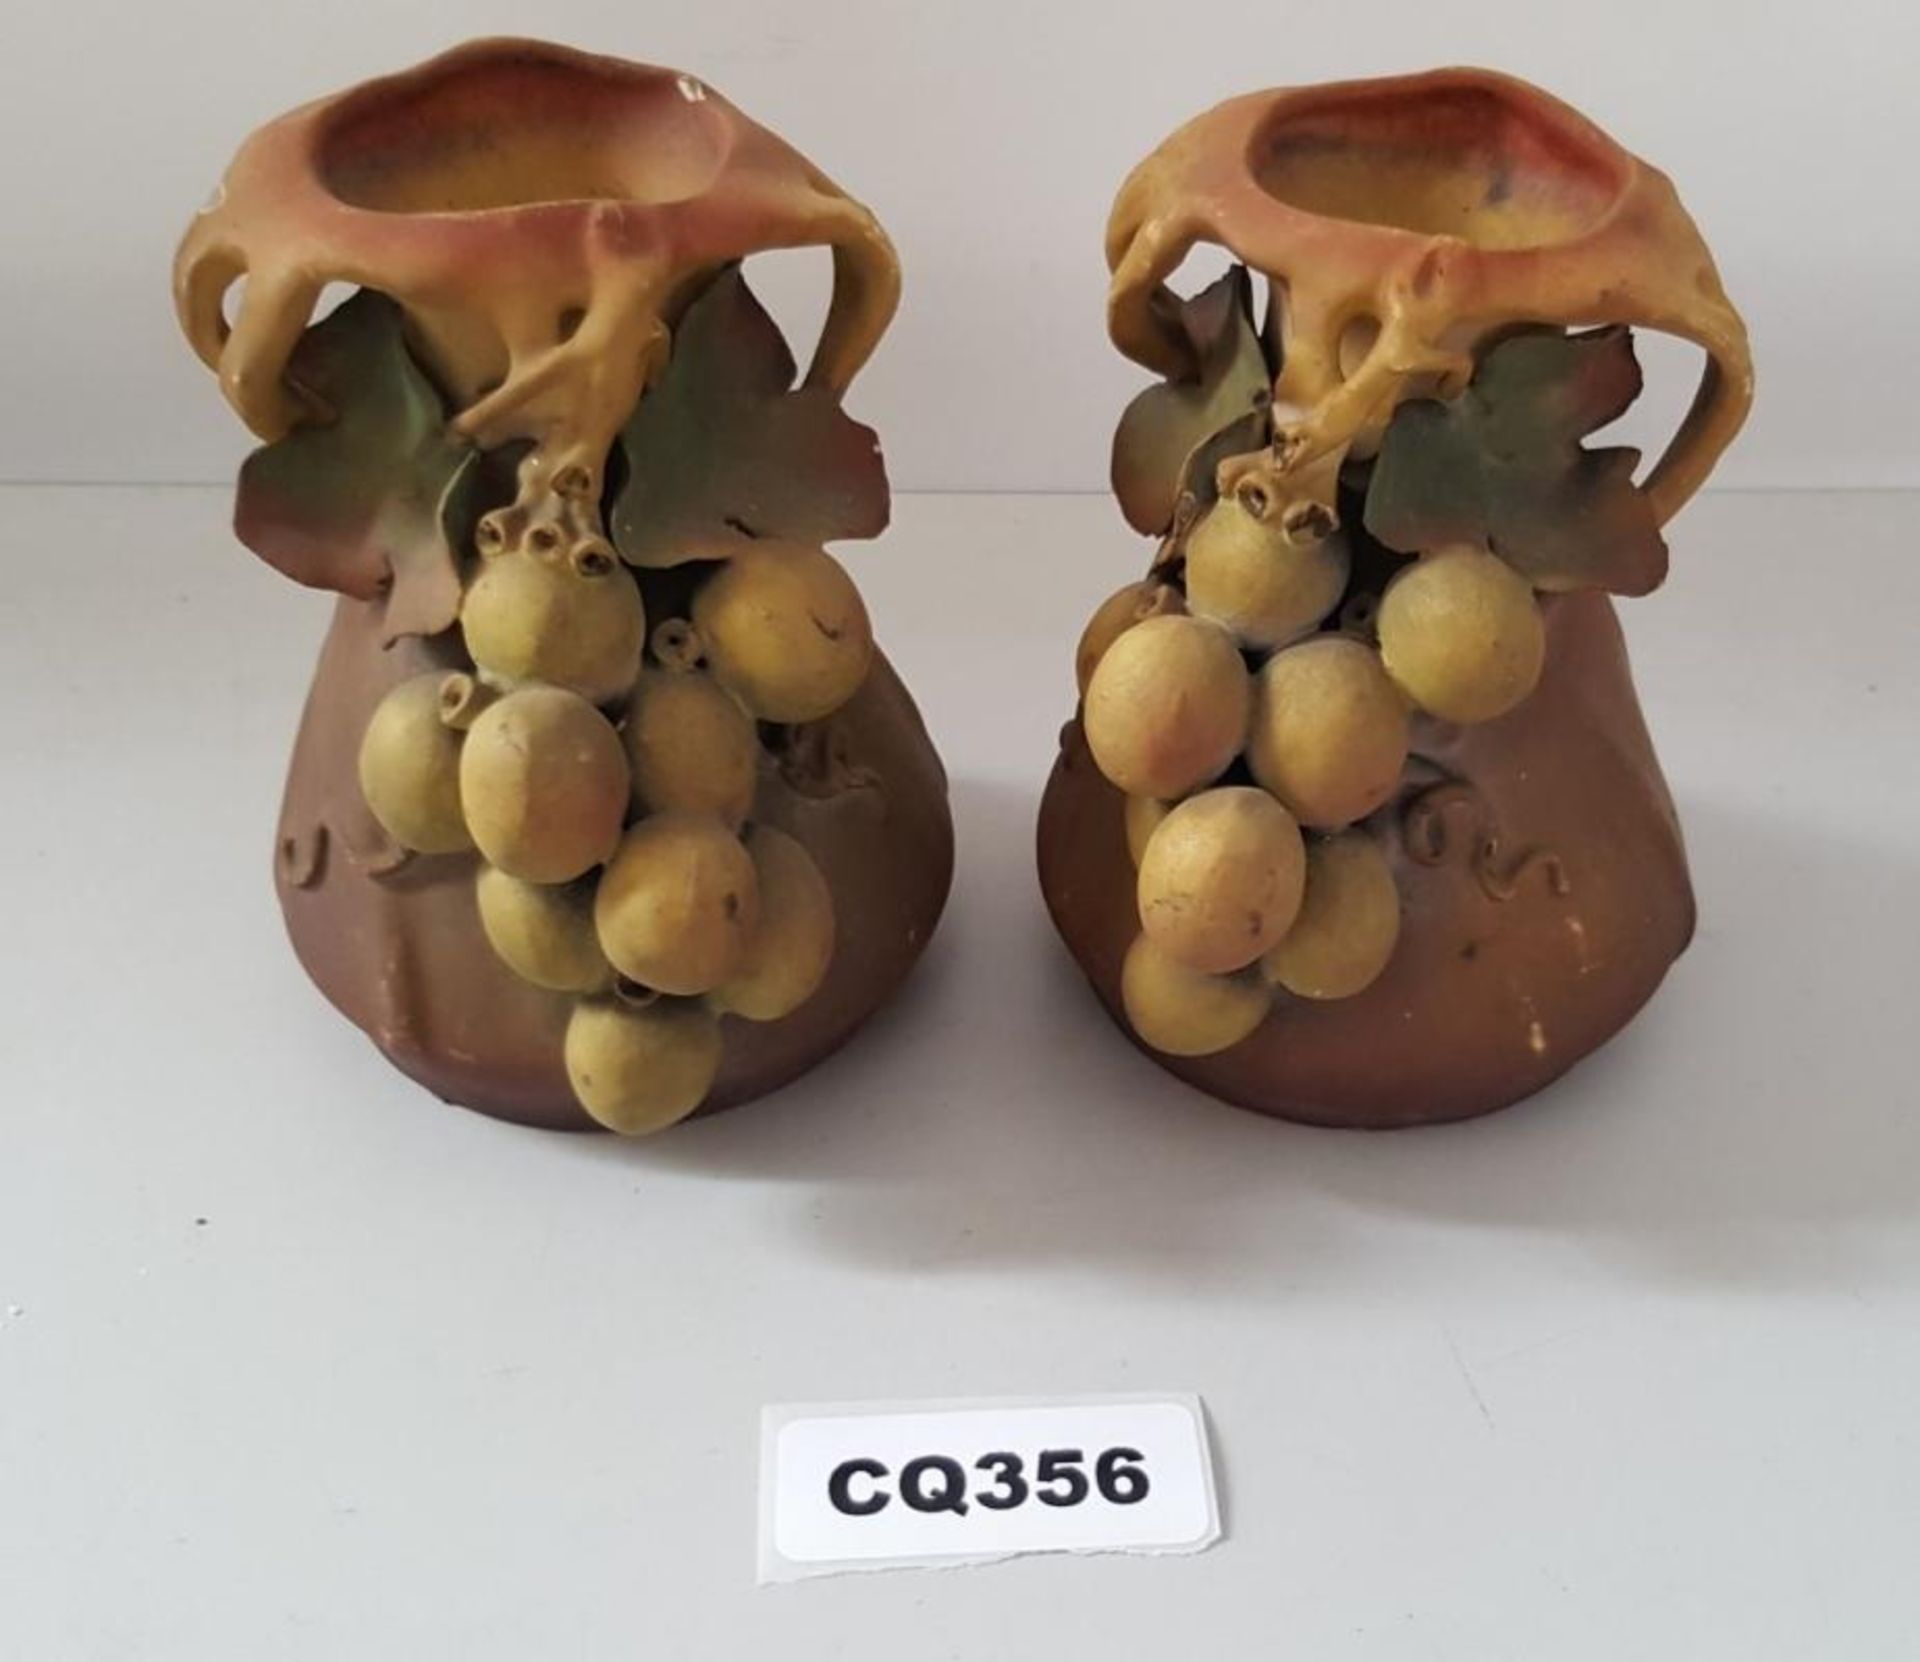 1 x A Pair Of Small Vases With Grape Design - Ref CQ356 E - Dimensions: H11/L9CM - CL334 - Location - Image 3 of 3